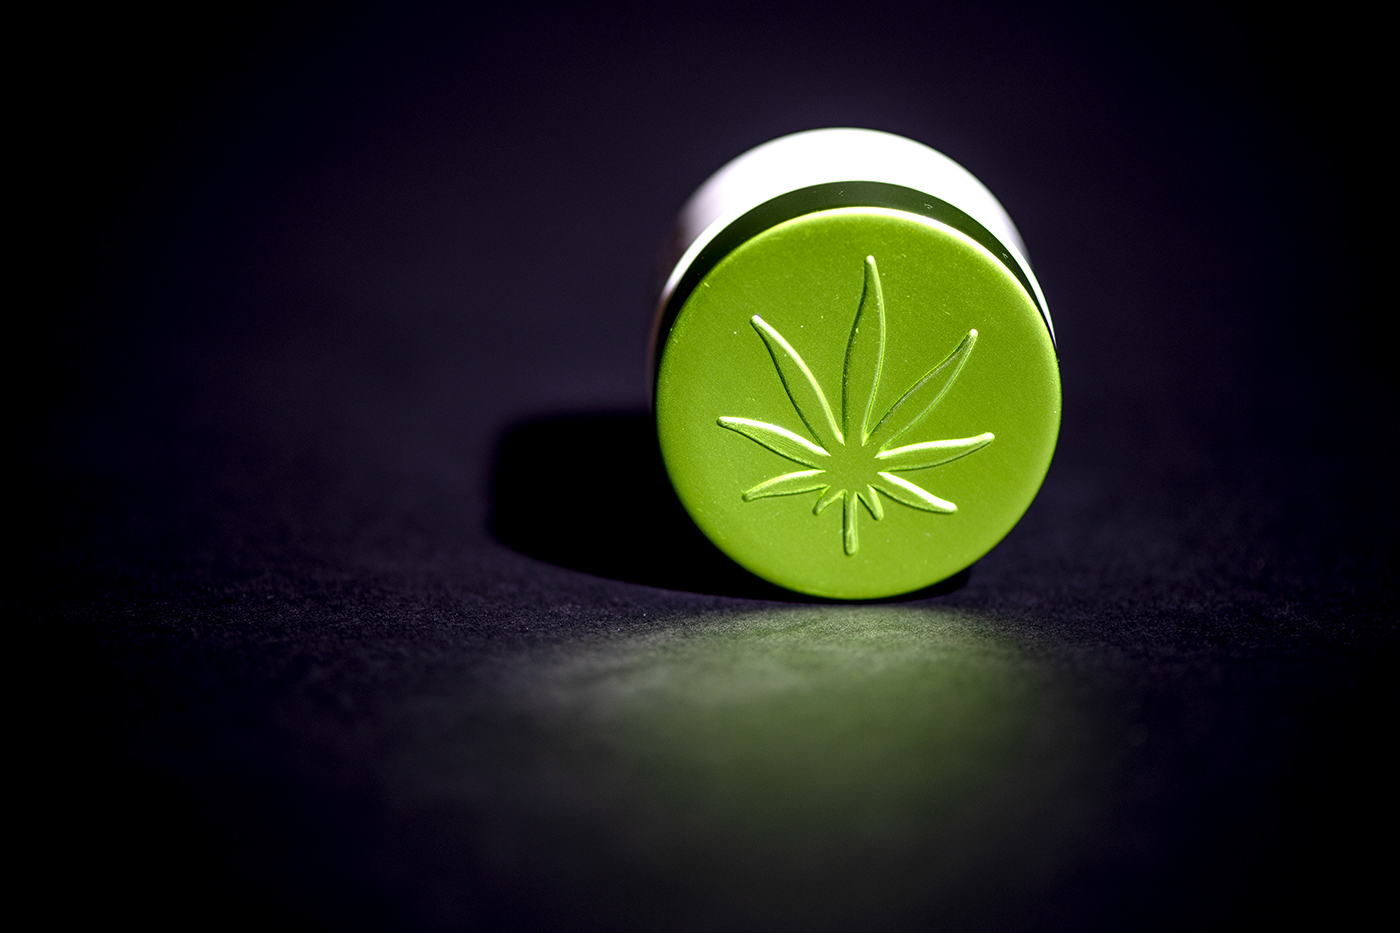 A closeup of a small green tablet with a marijuana leaf on it